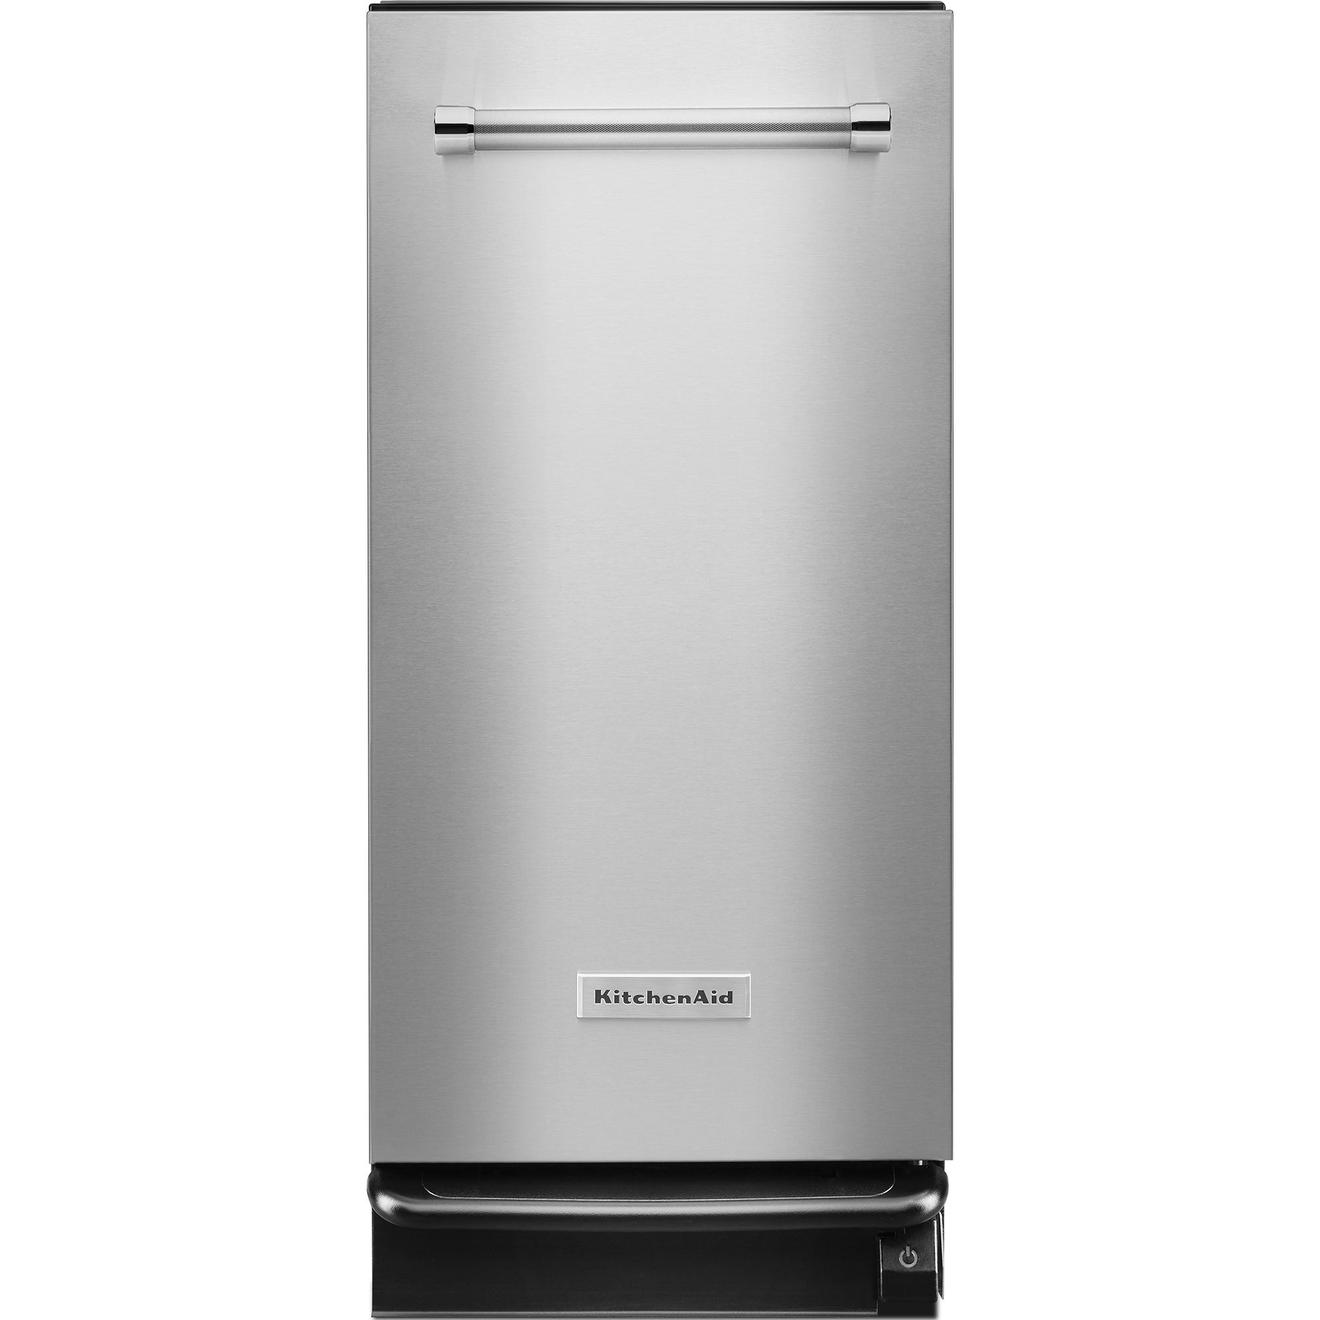 KitchenAid 1.4 cu.ft. Total Compactor offers at $1599.98 in Trail Appliances